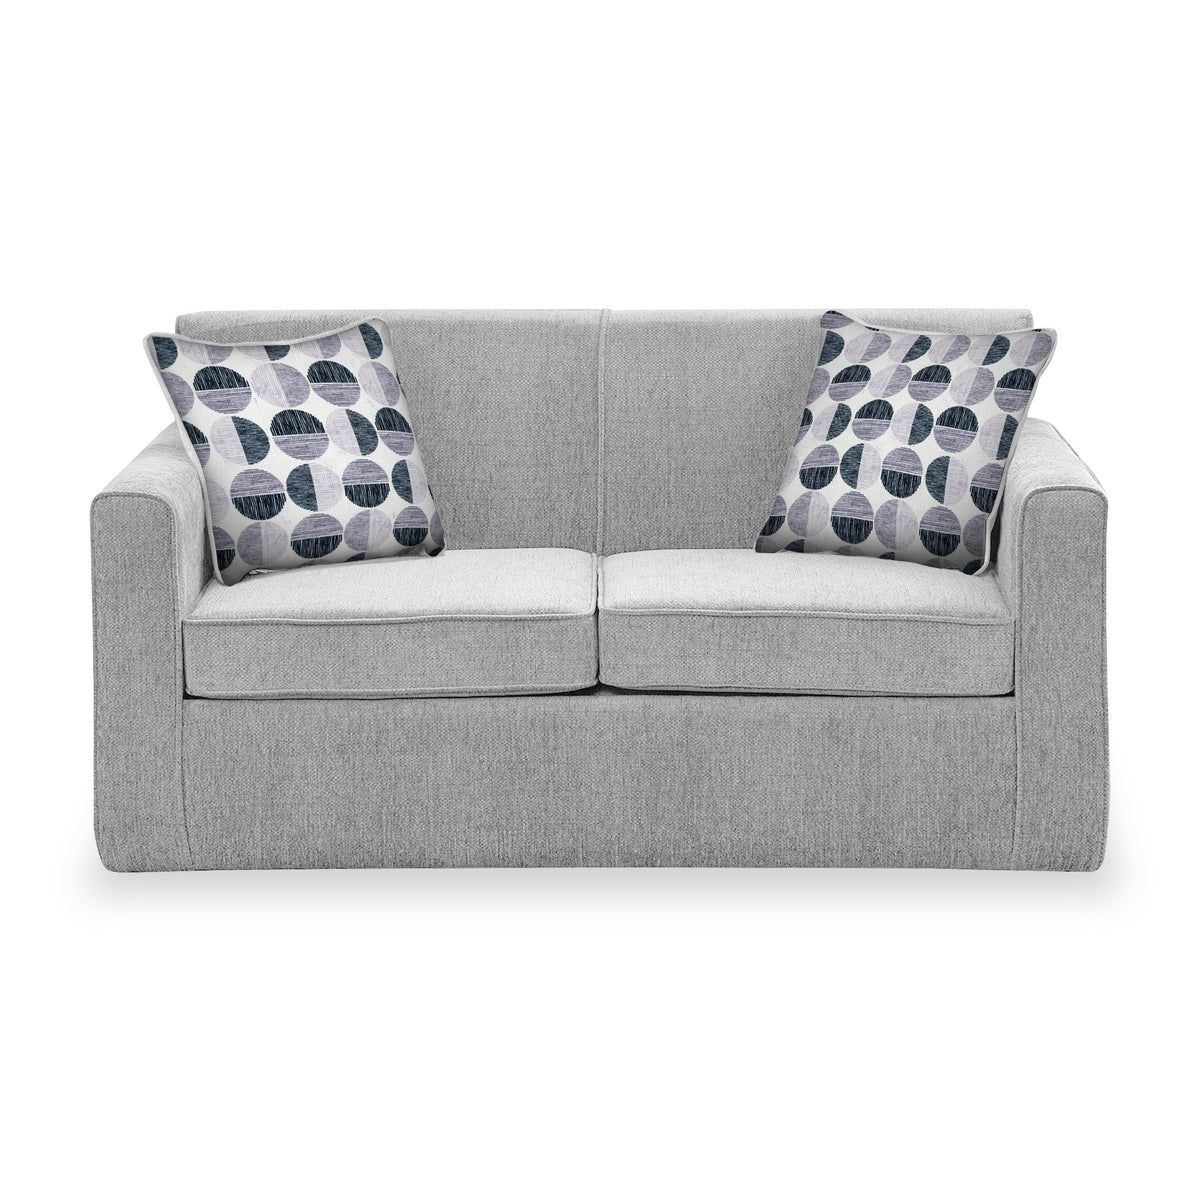 Bawtry Silver Faux Linen 2 Seater Sofabed with Mono Scatter Cushions from Roseland Furniture